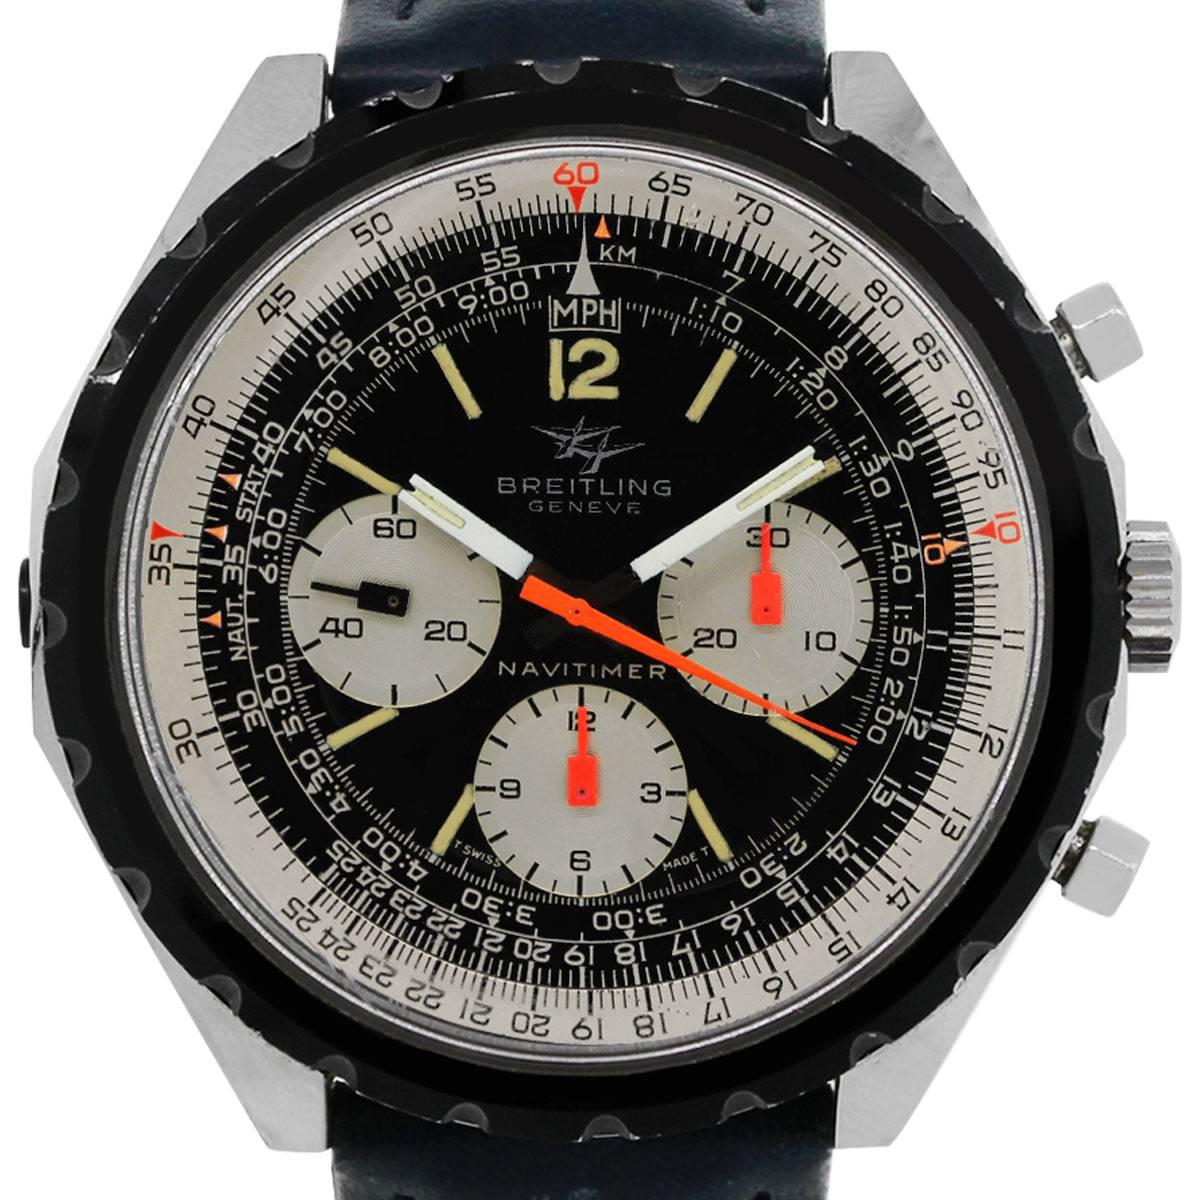 Breitling Stainless Steel Navitimer Chronograph Manual Wristwatch Ref 0816